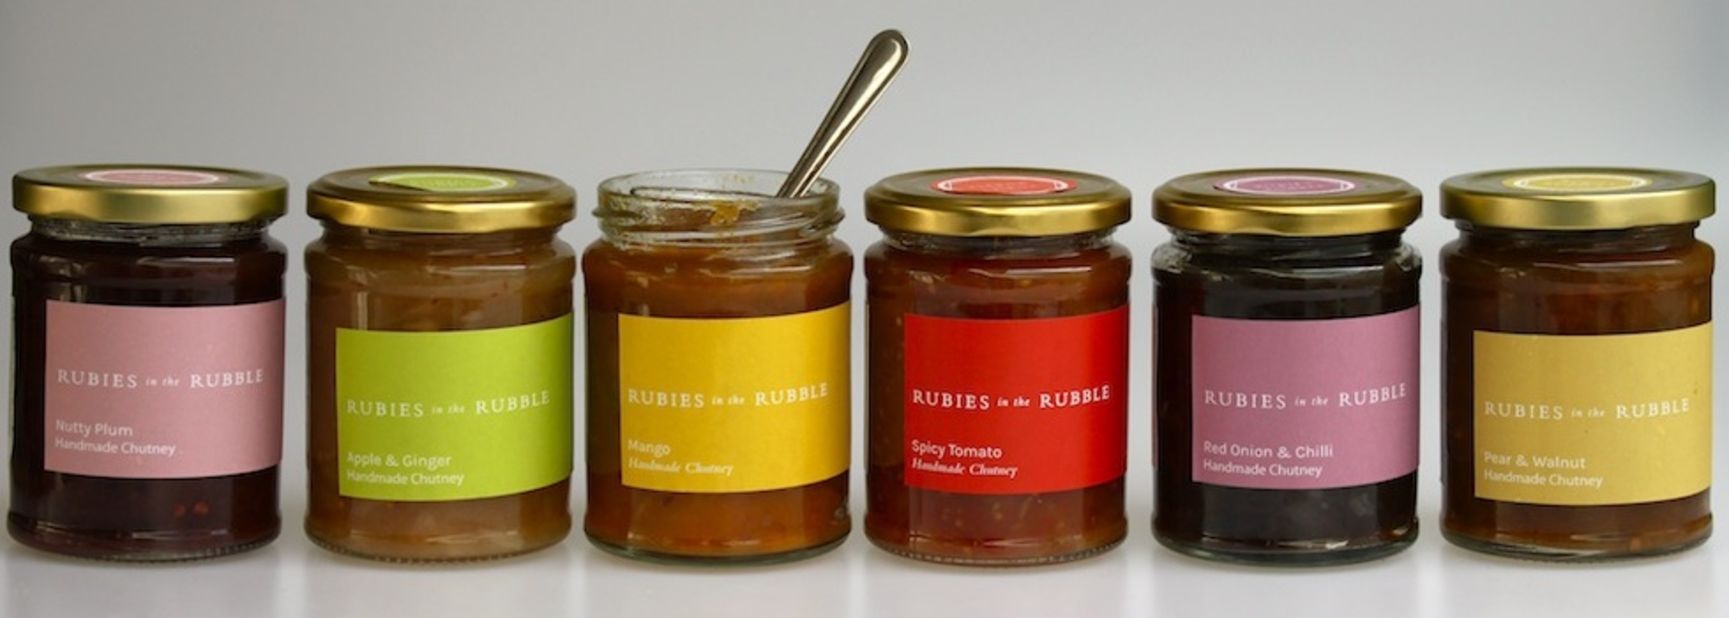 Reducing waste is another big priority for restauranteurs these days. British start-up <a href="http://www.rubiesintherubble.com/" target="_blank" target="_blank">Rubies in the Rubble </a>creates chutneys, jams and pickles from surplus fruit and vegetables. The company is now producing 1,000 jars a week, saving over a ton of fruit from being wasted every seven days.